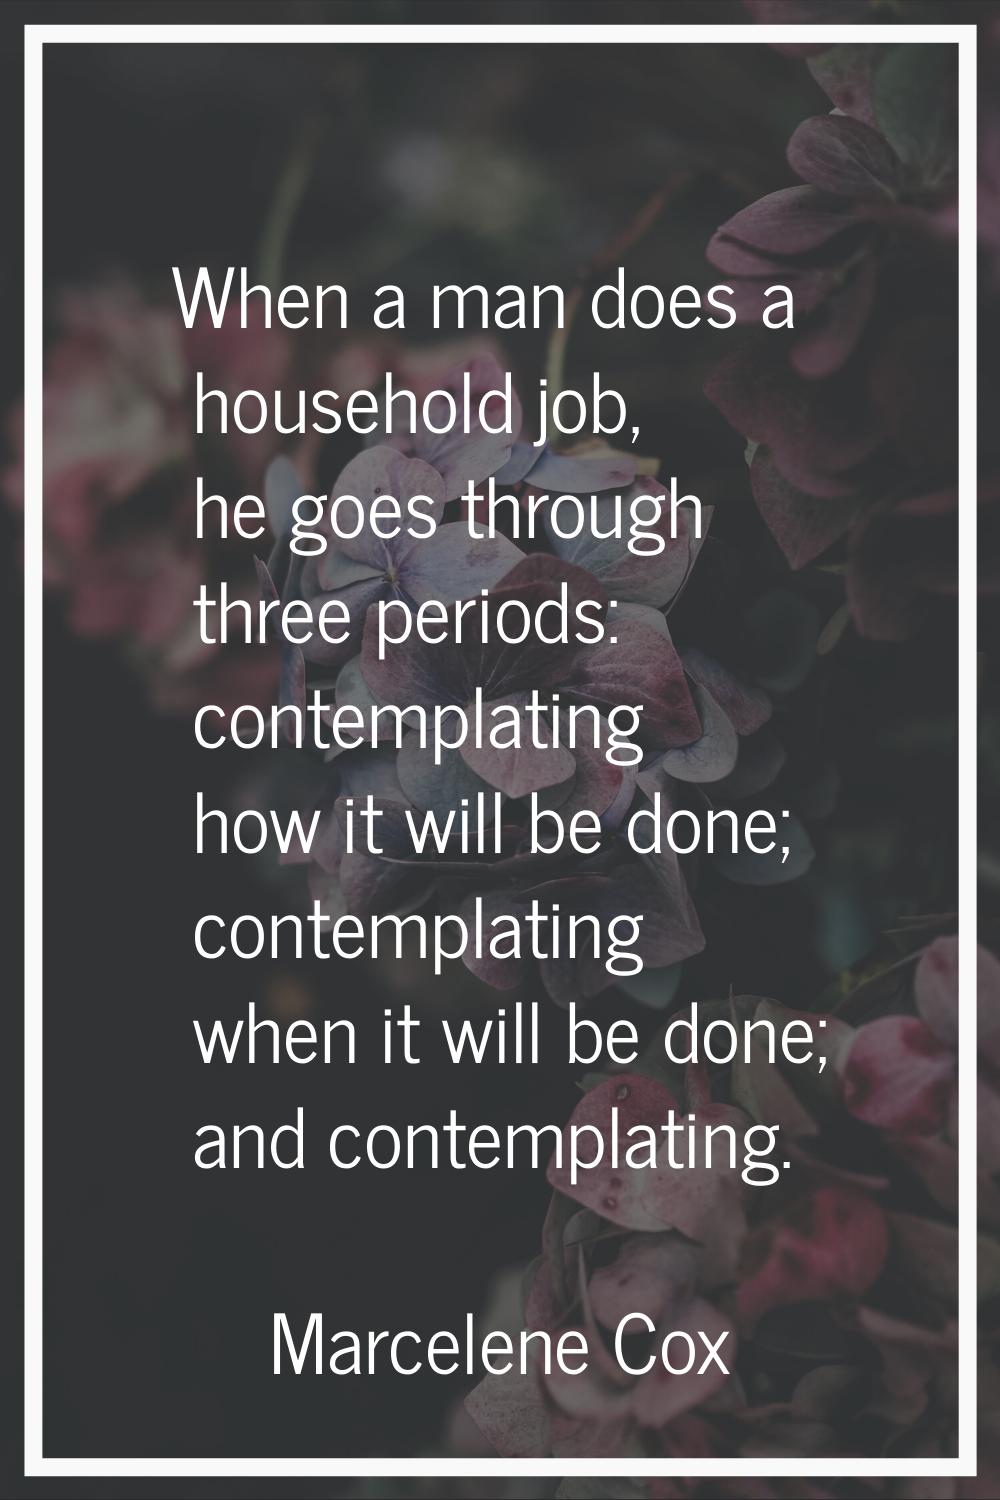 When a man does a household job, he goes through three periods: contemplating how it will be done; 